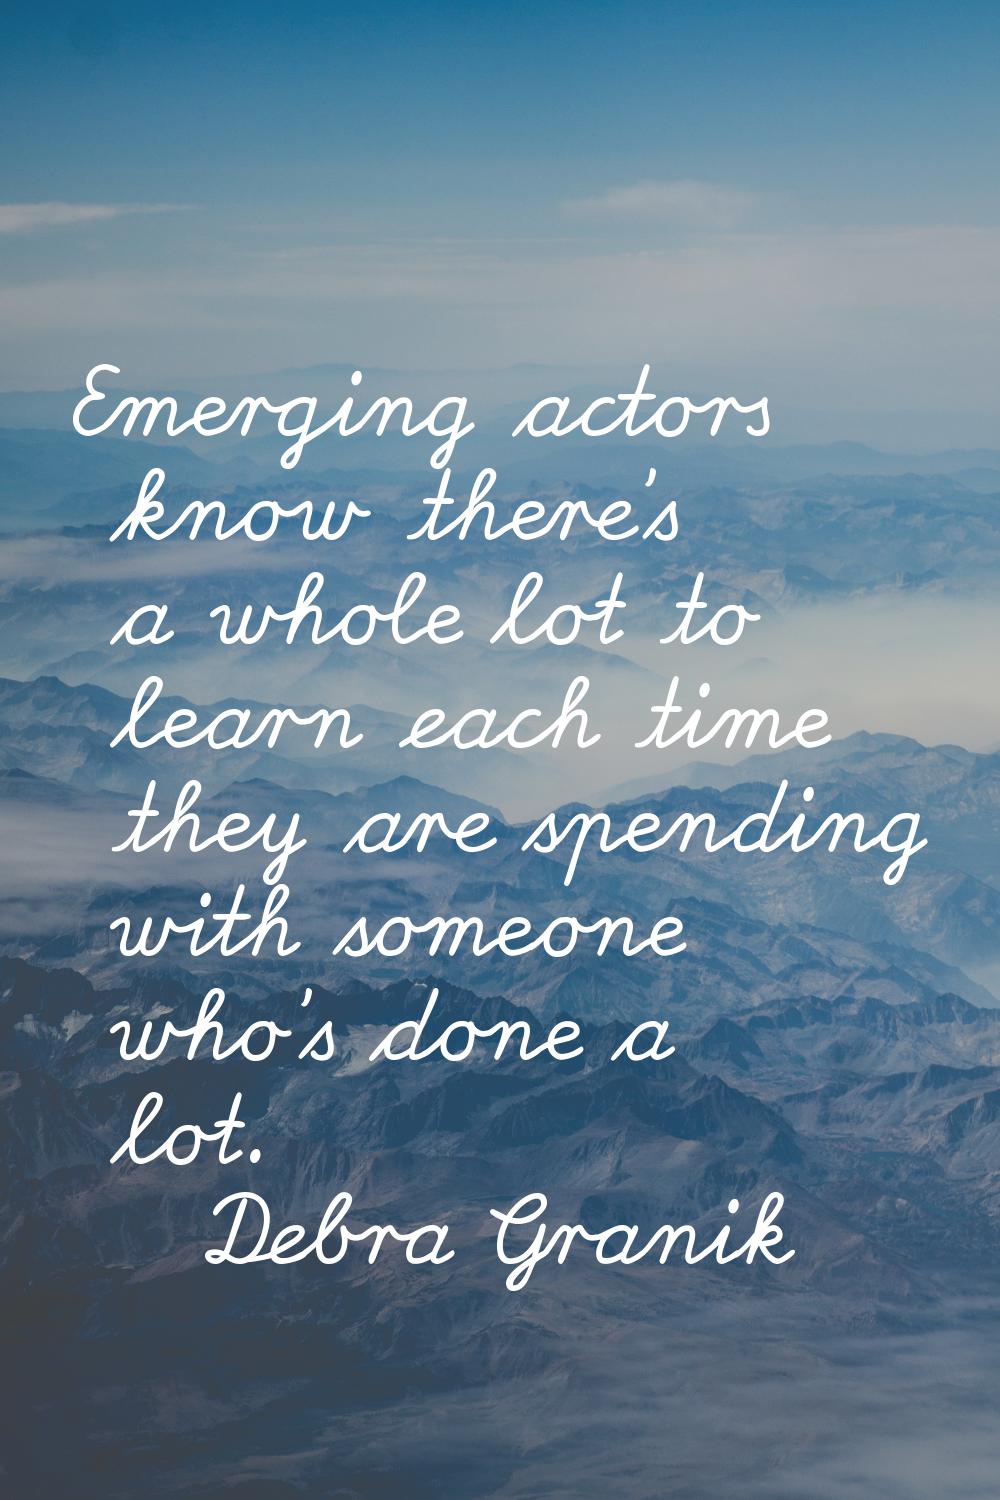 Emerging actors know there's a whole lot to learn each time they are spending with someone who's do